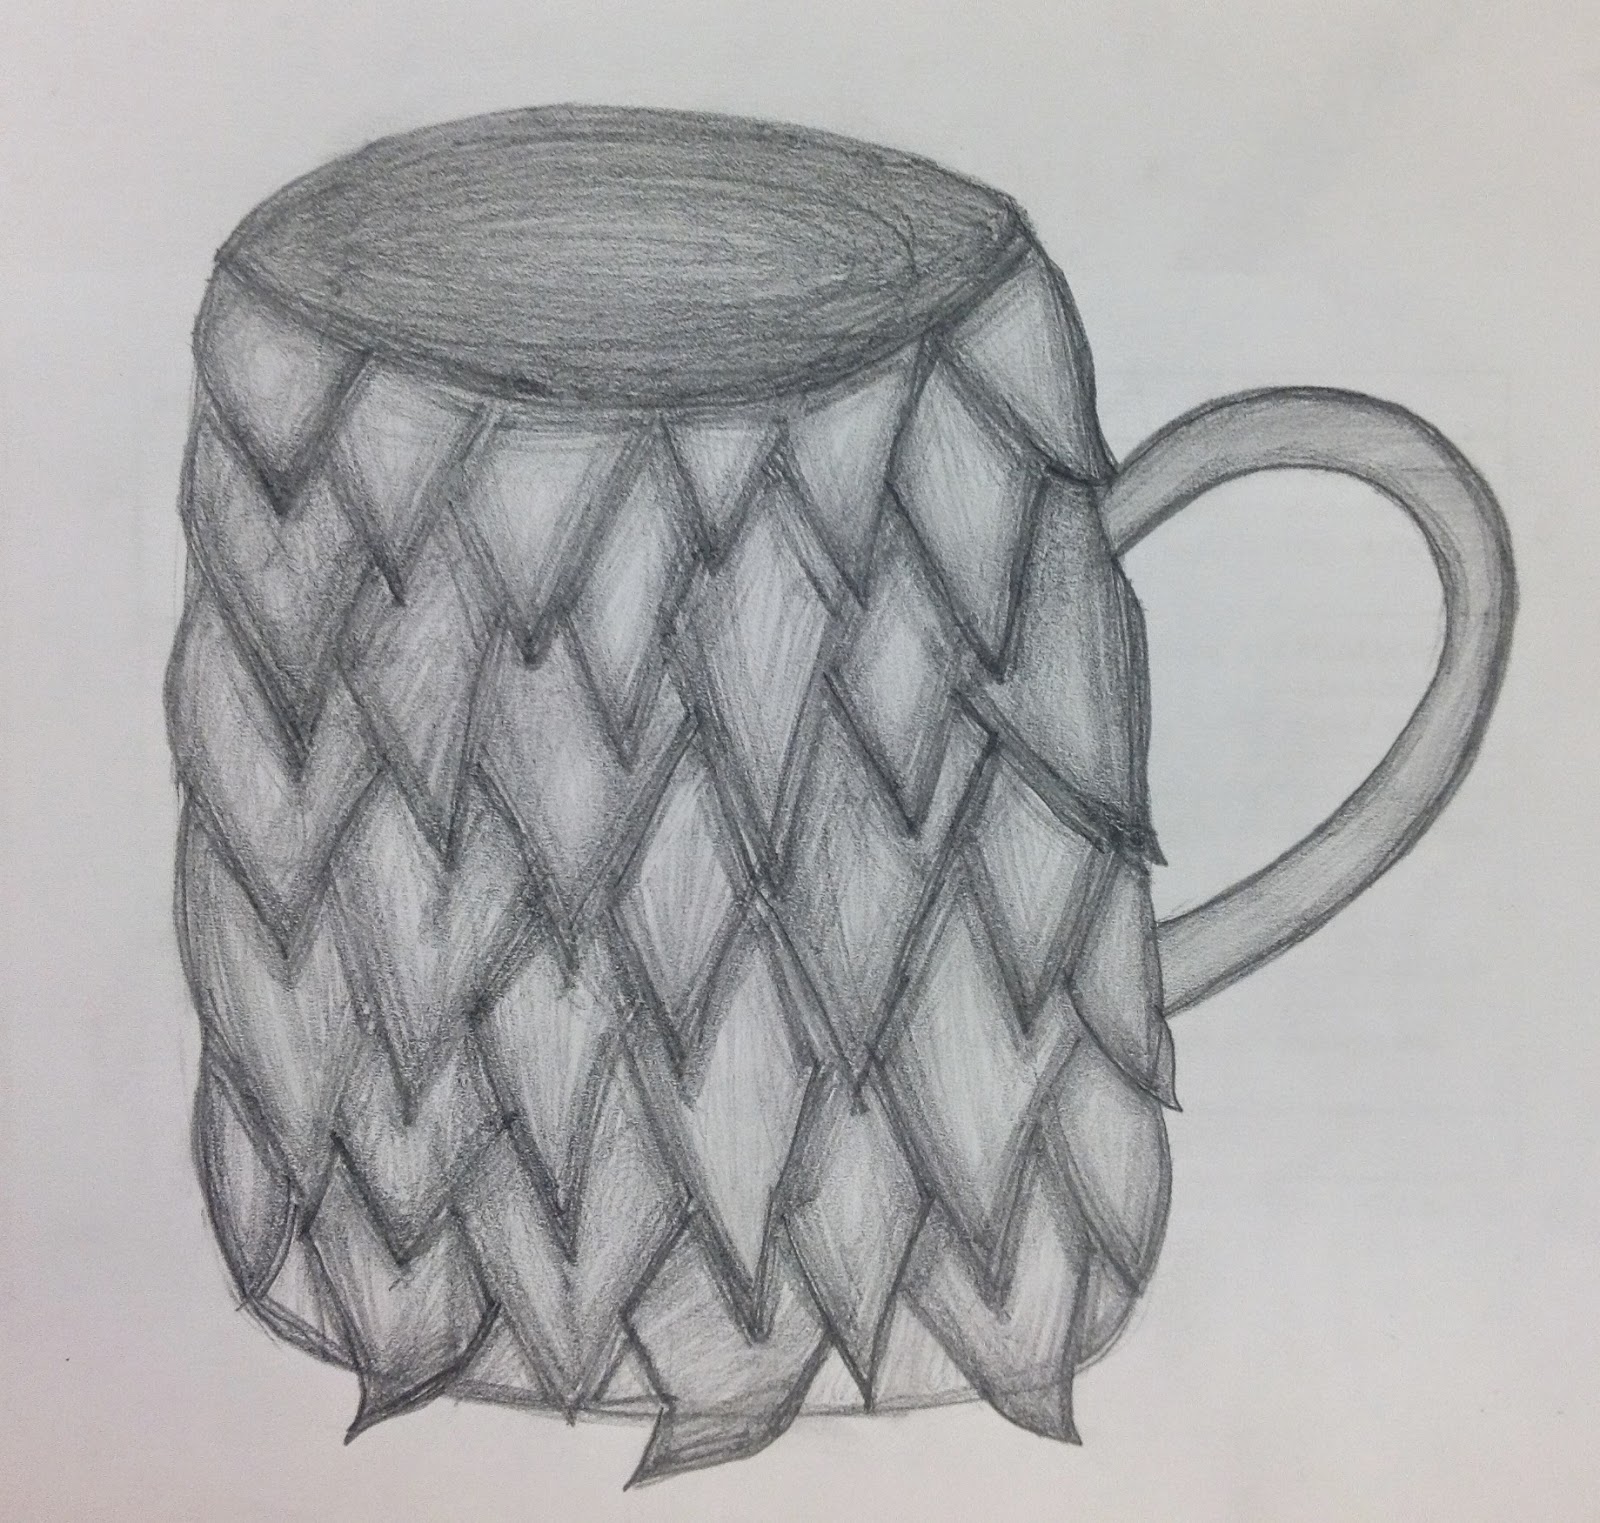 Lesson: Drawing Everyday Objects